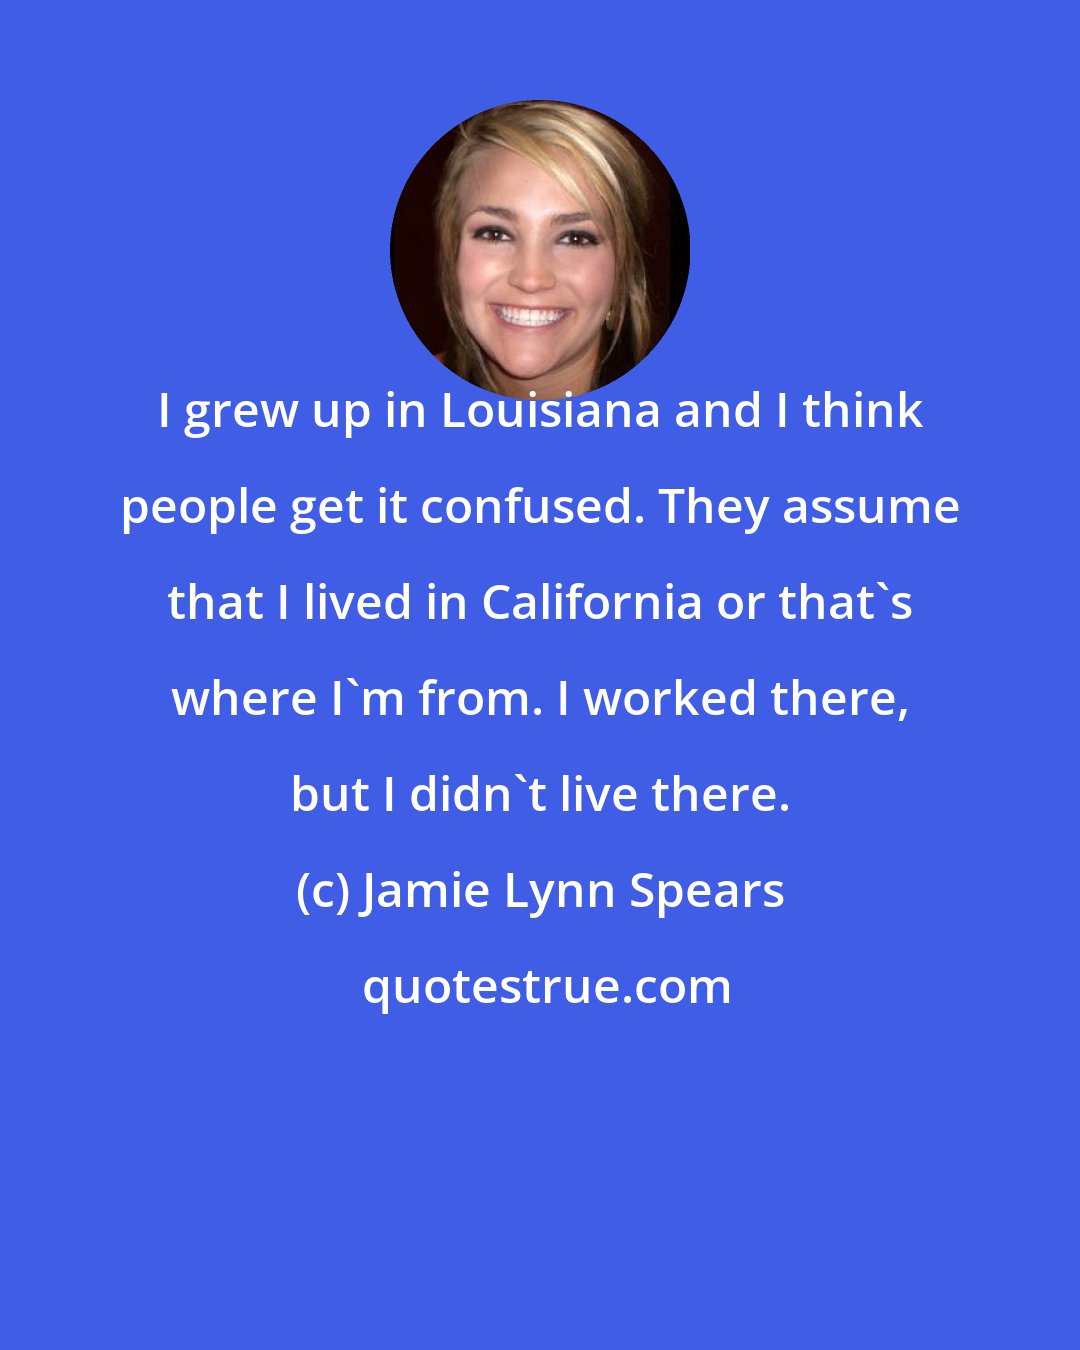 Jamie Lynn Spears: I grew up in Louisiana and I think people get it confused. They assume that I lived in California or that's where I'm from. I worked there, but I didn't live there.